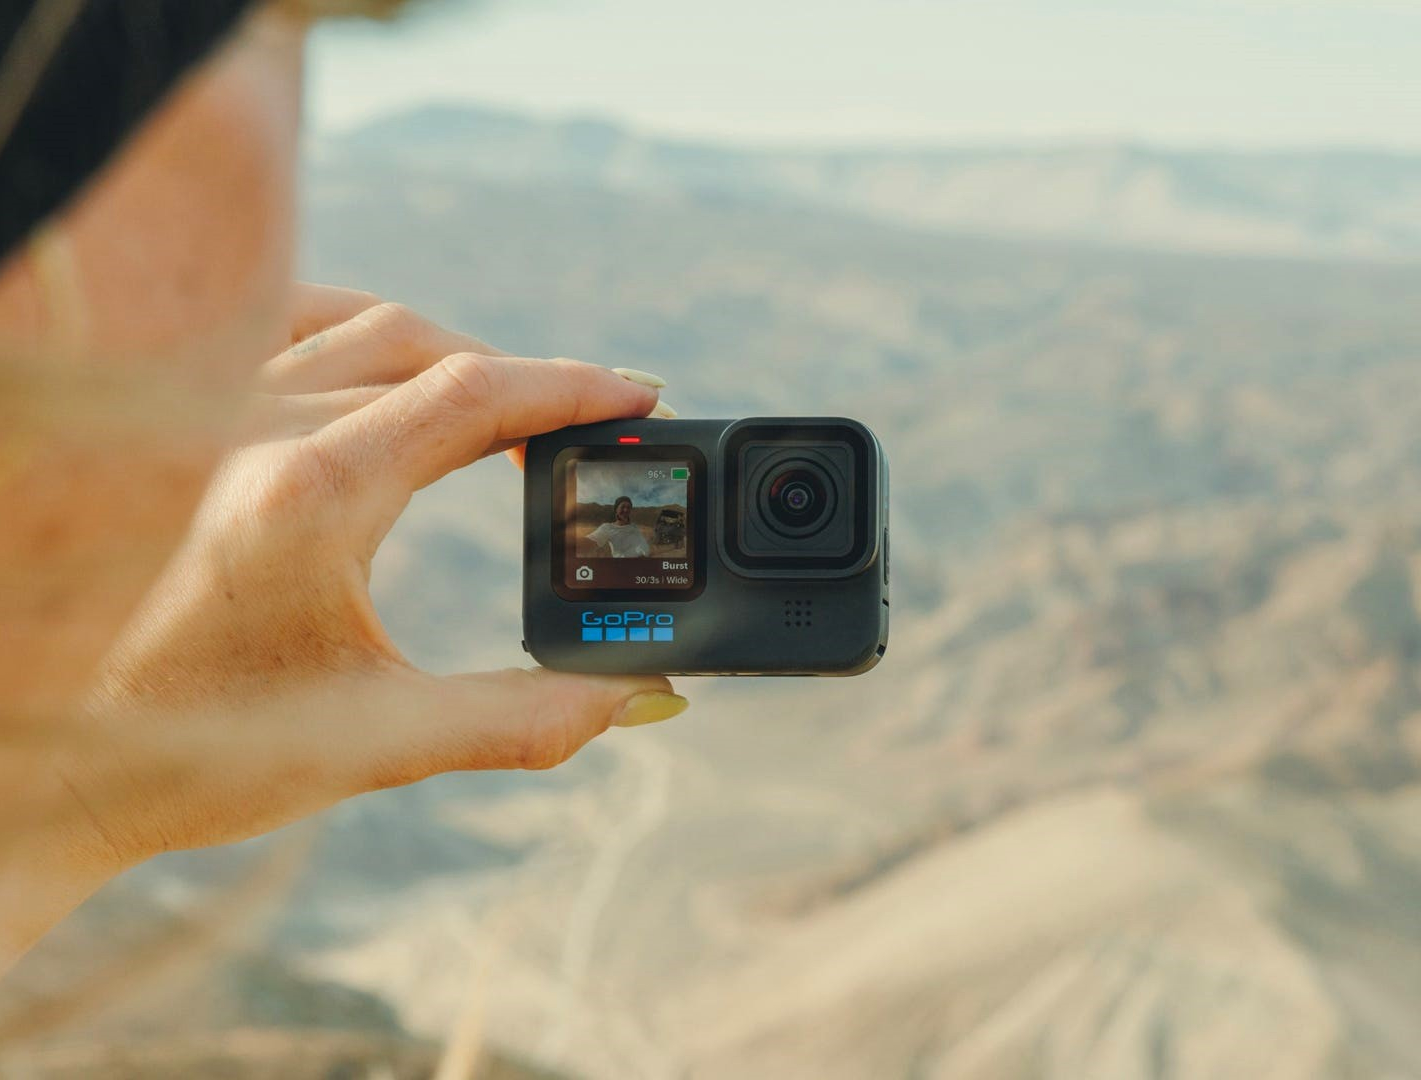 GoPro HERO 12 Black – Just Released! – Bonkers Competitions